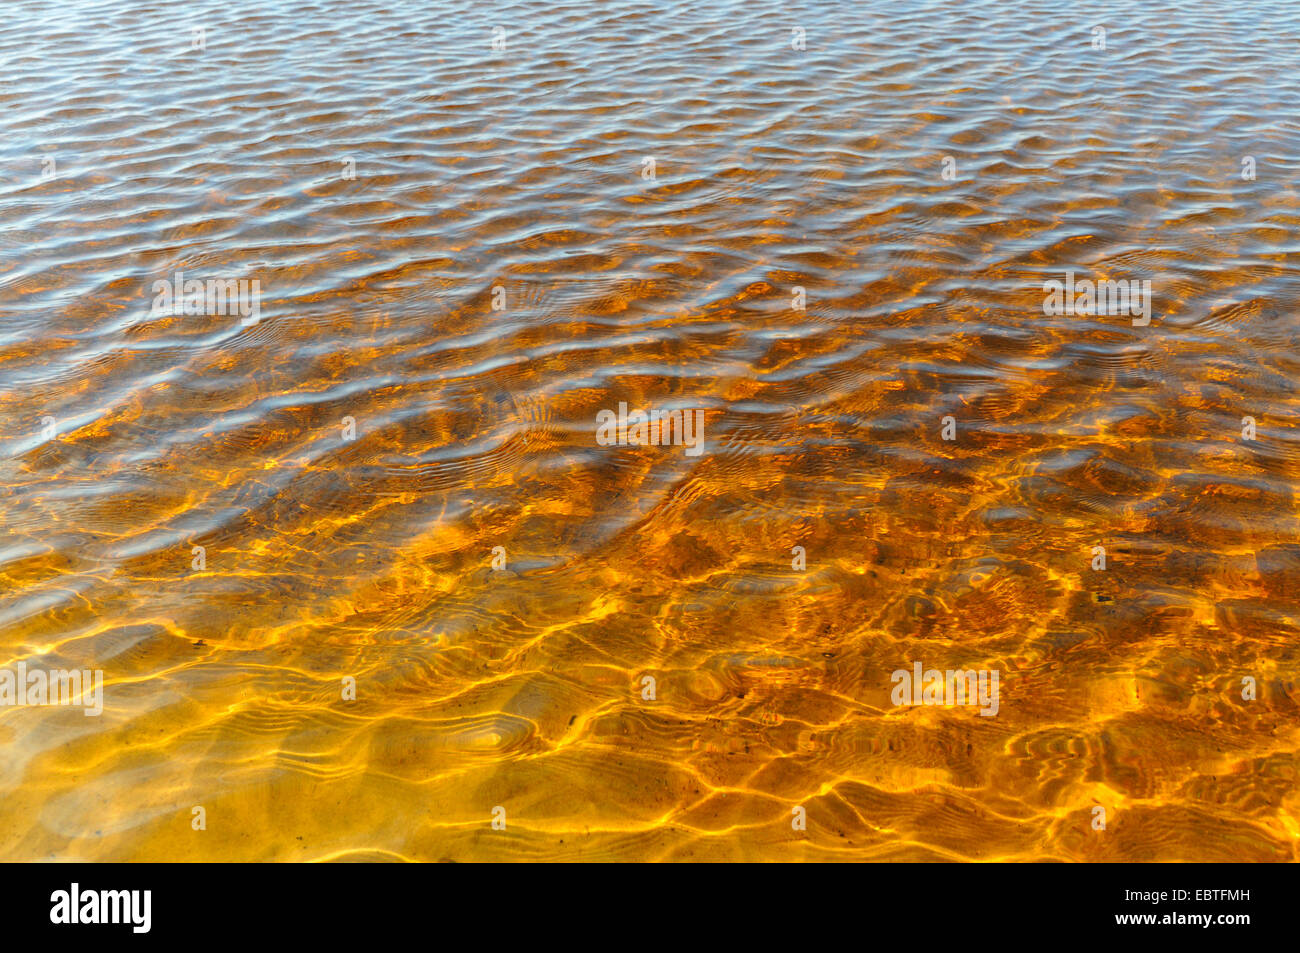 amber-coloured shallow water with slight waves at the sand beach, Germany, Mecklenburg-Western Pomerania Stock Photo